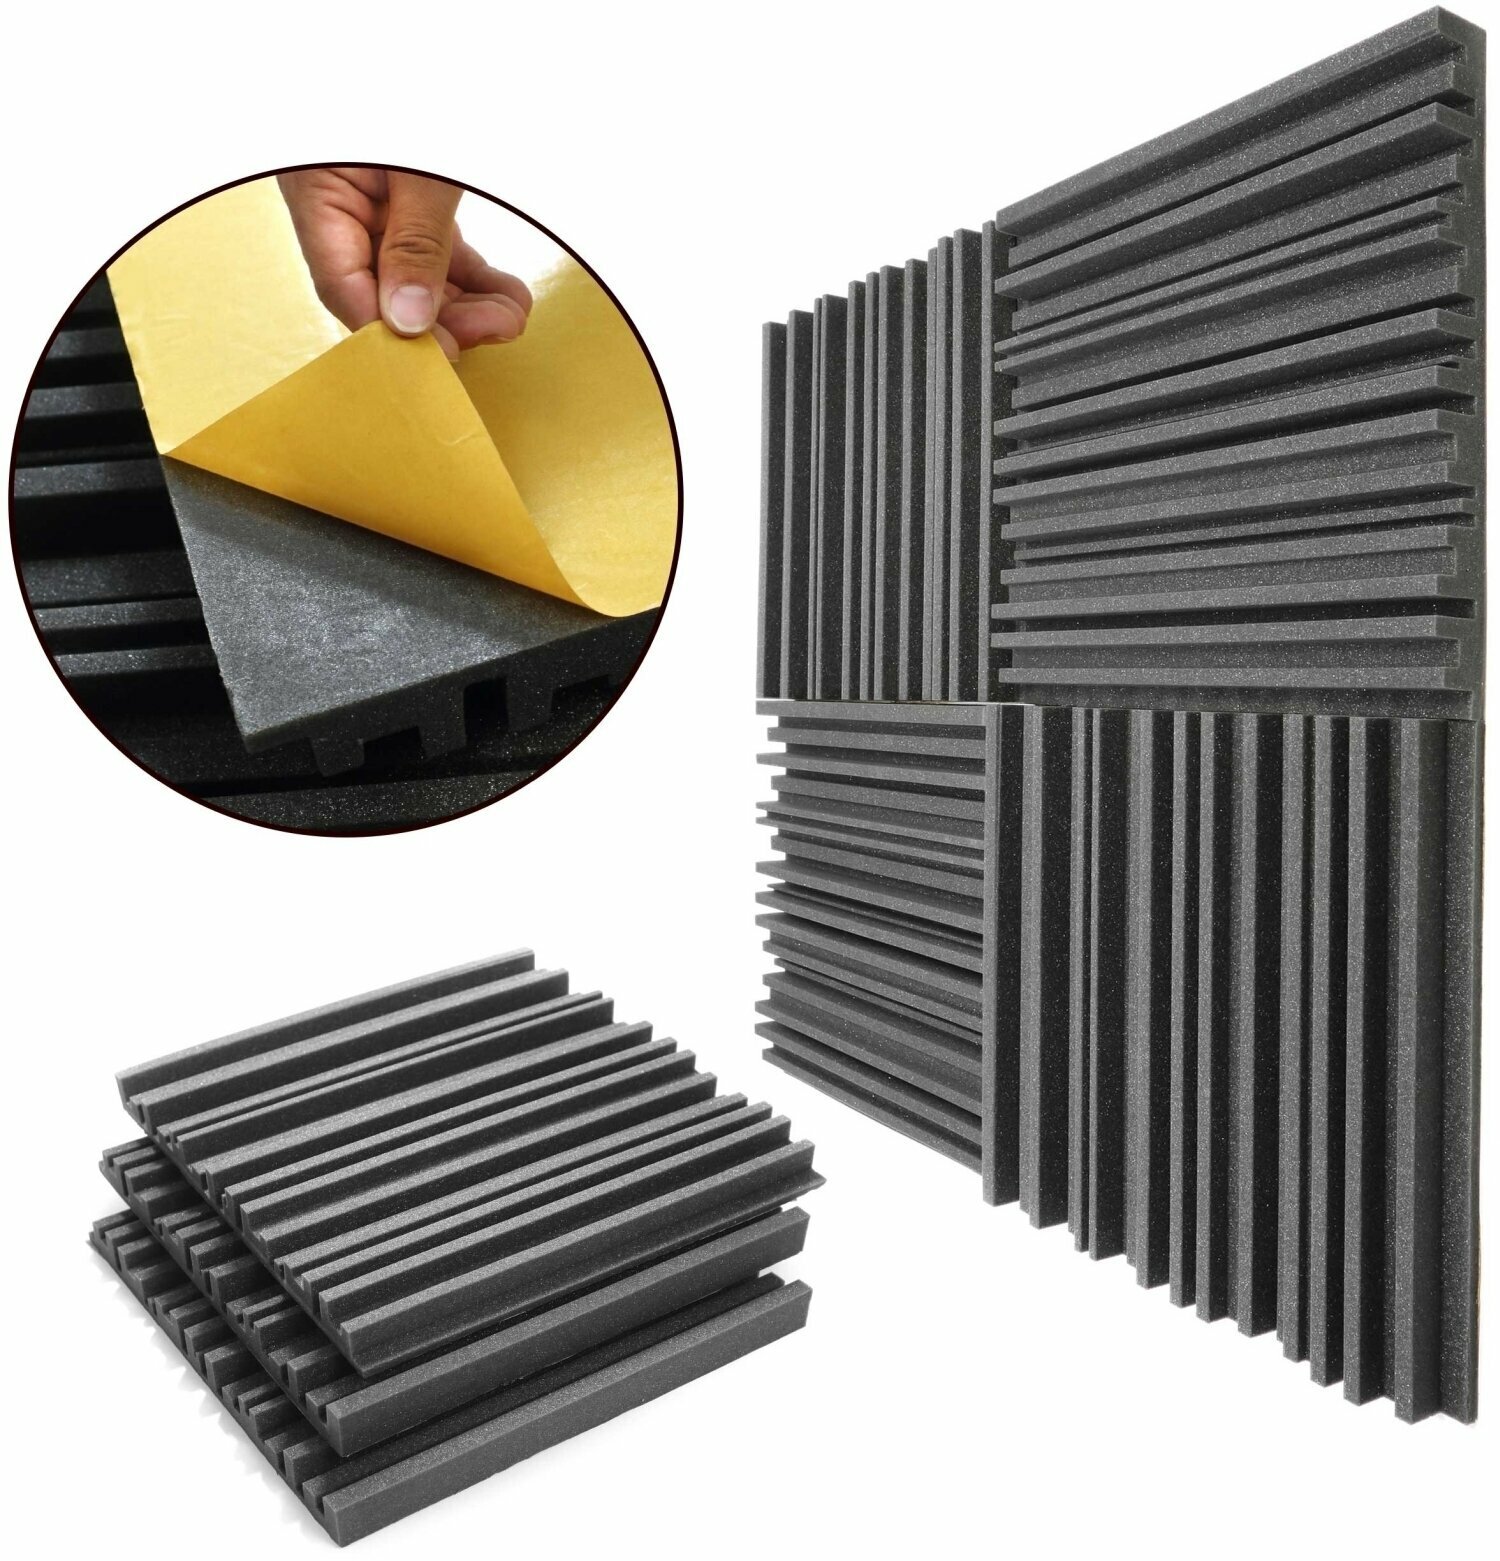 Chłonny panel piankowy Veles-X Acoustic Self-Adhesive Wedges 50 x 50 x 5 cm - MVSS 302 Anthracite